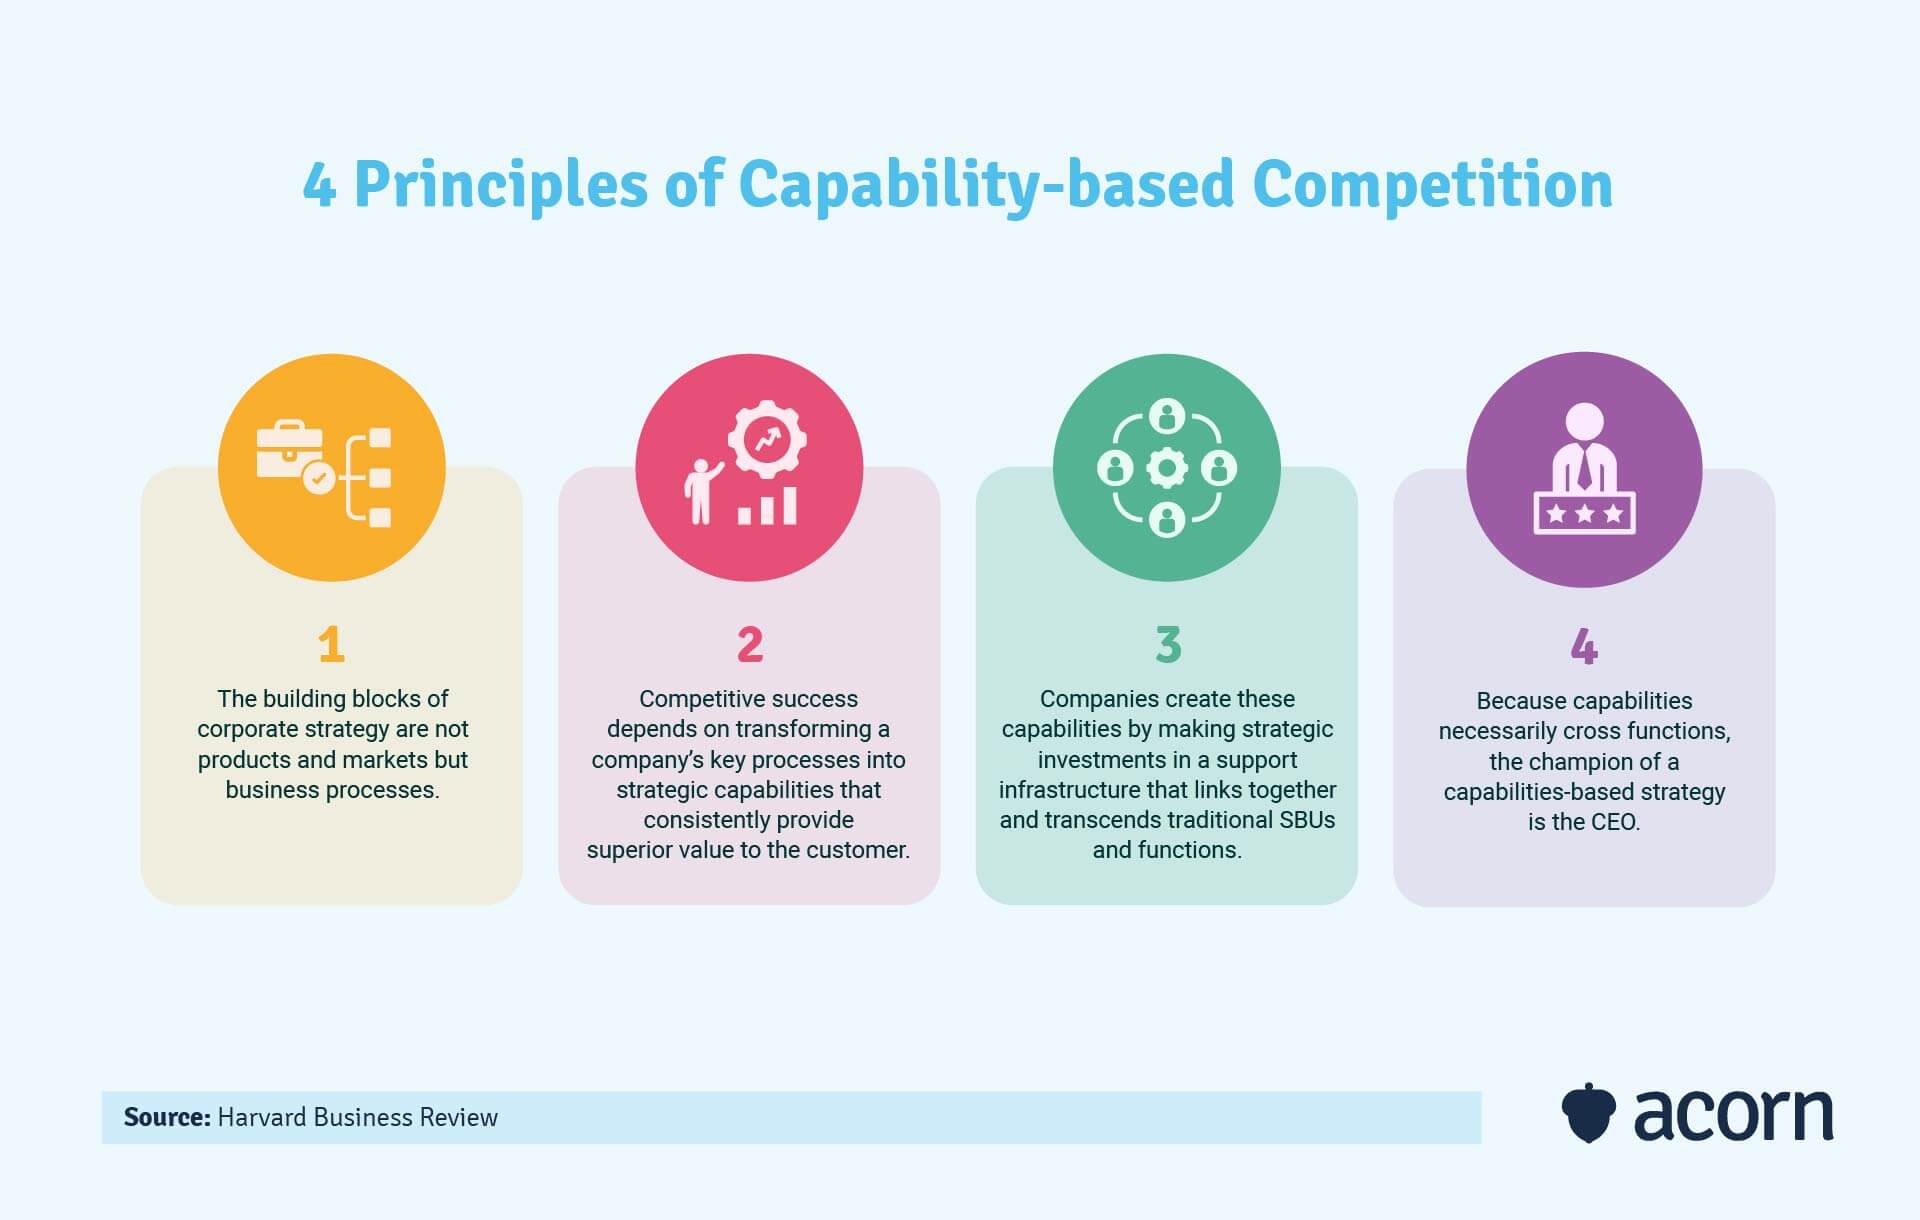 infographic showing 4 principles of capability-based competition